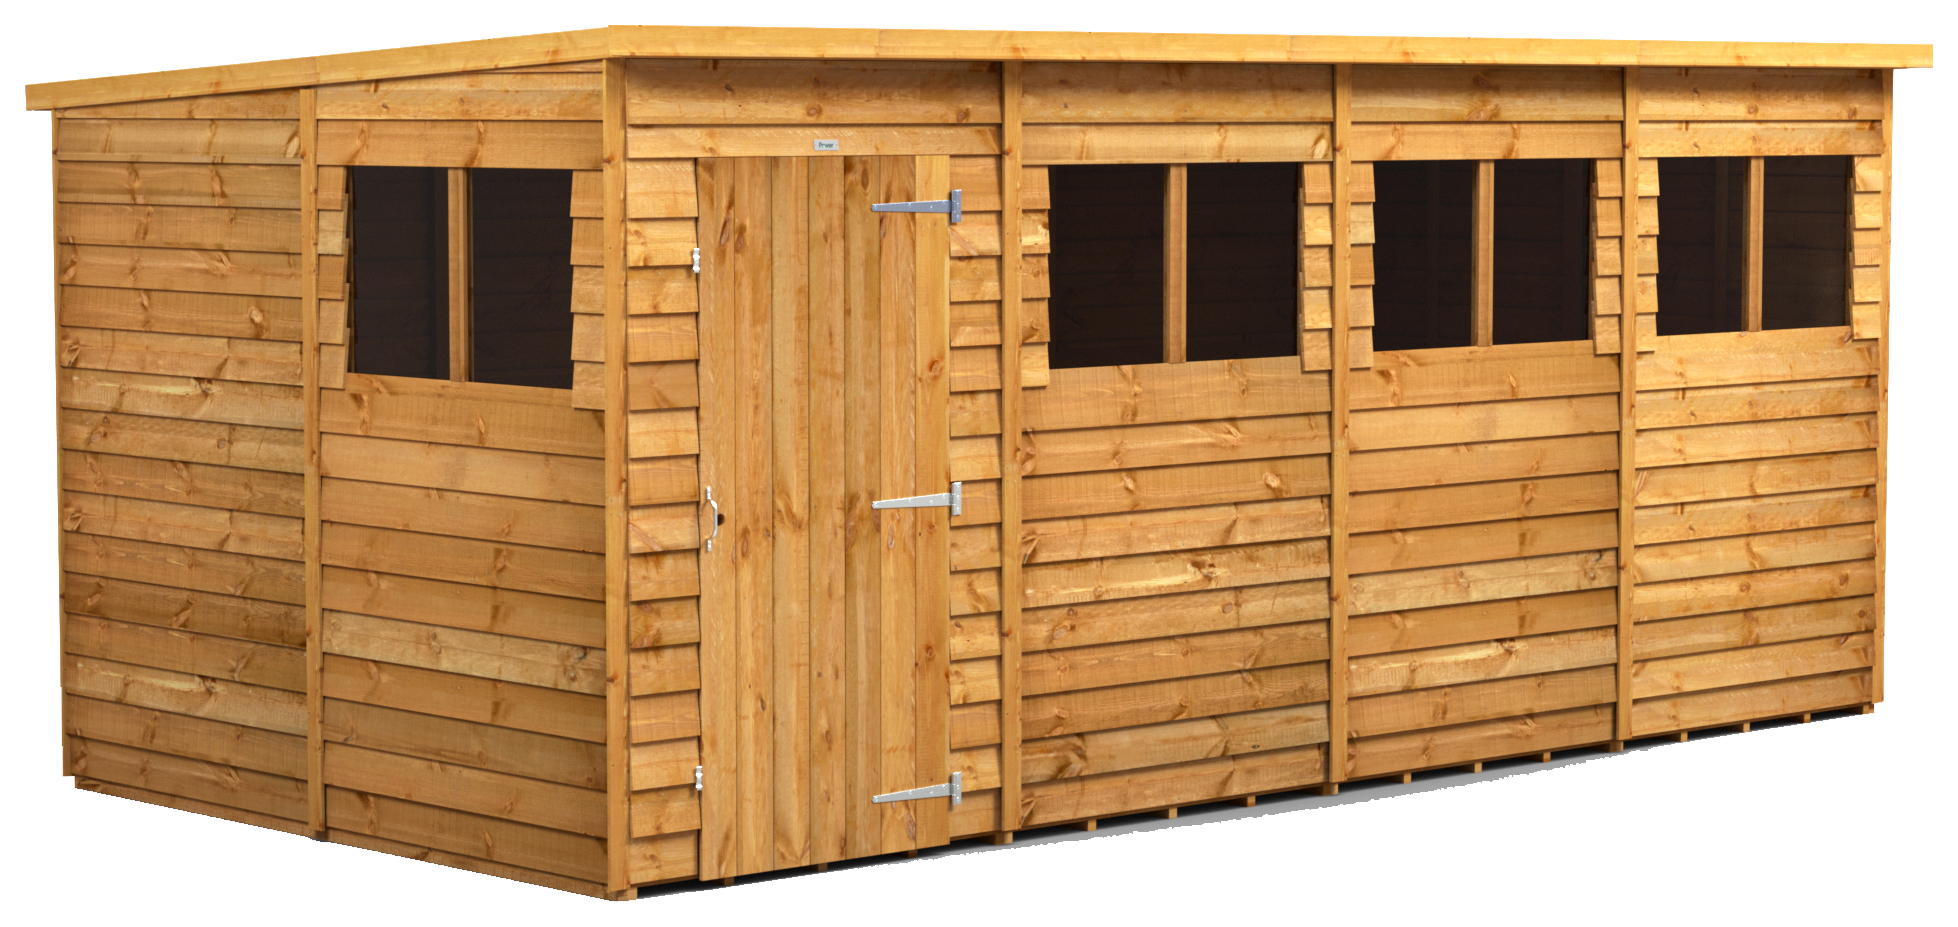 Power Sheds Pent Overlap Dip Treated Shed - 16 x 8ft